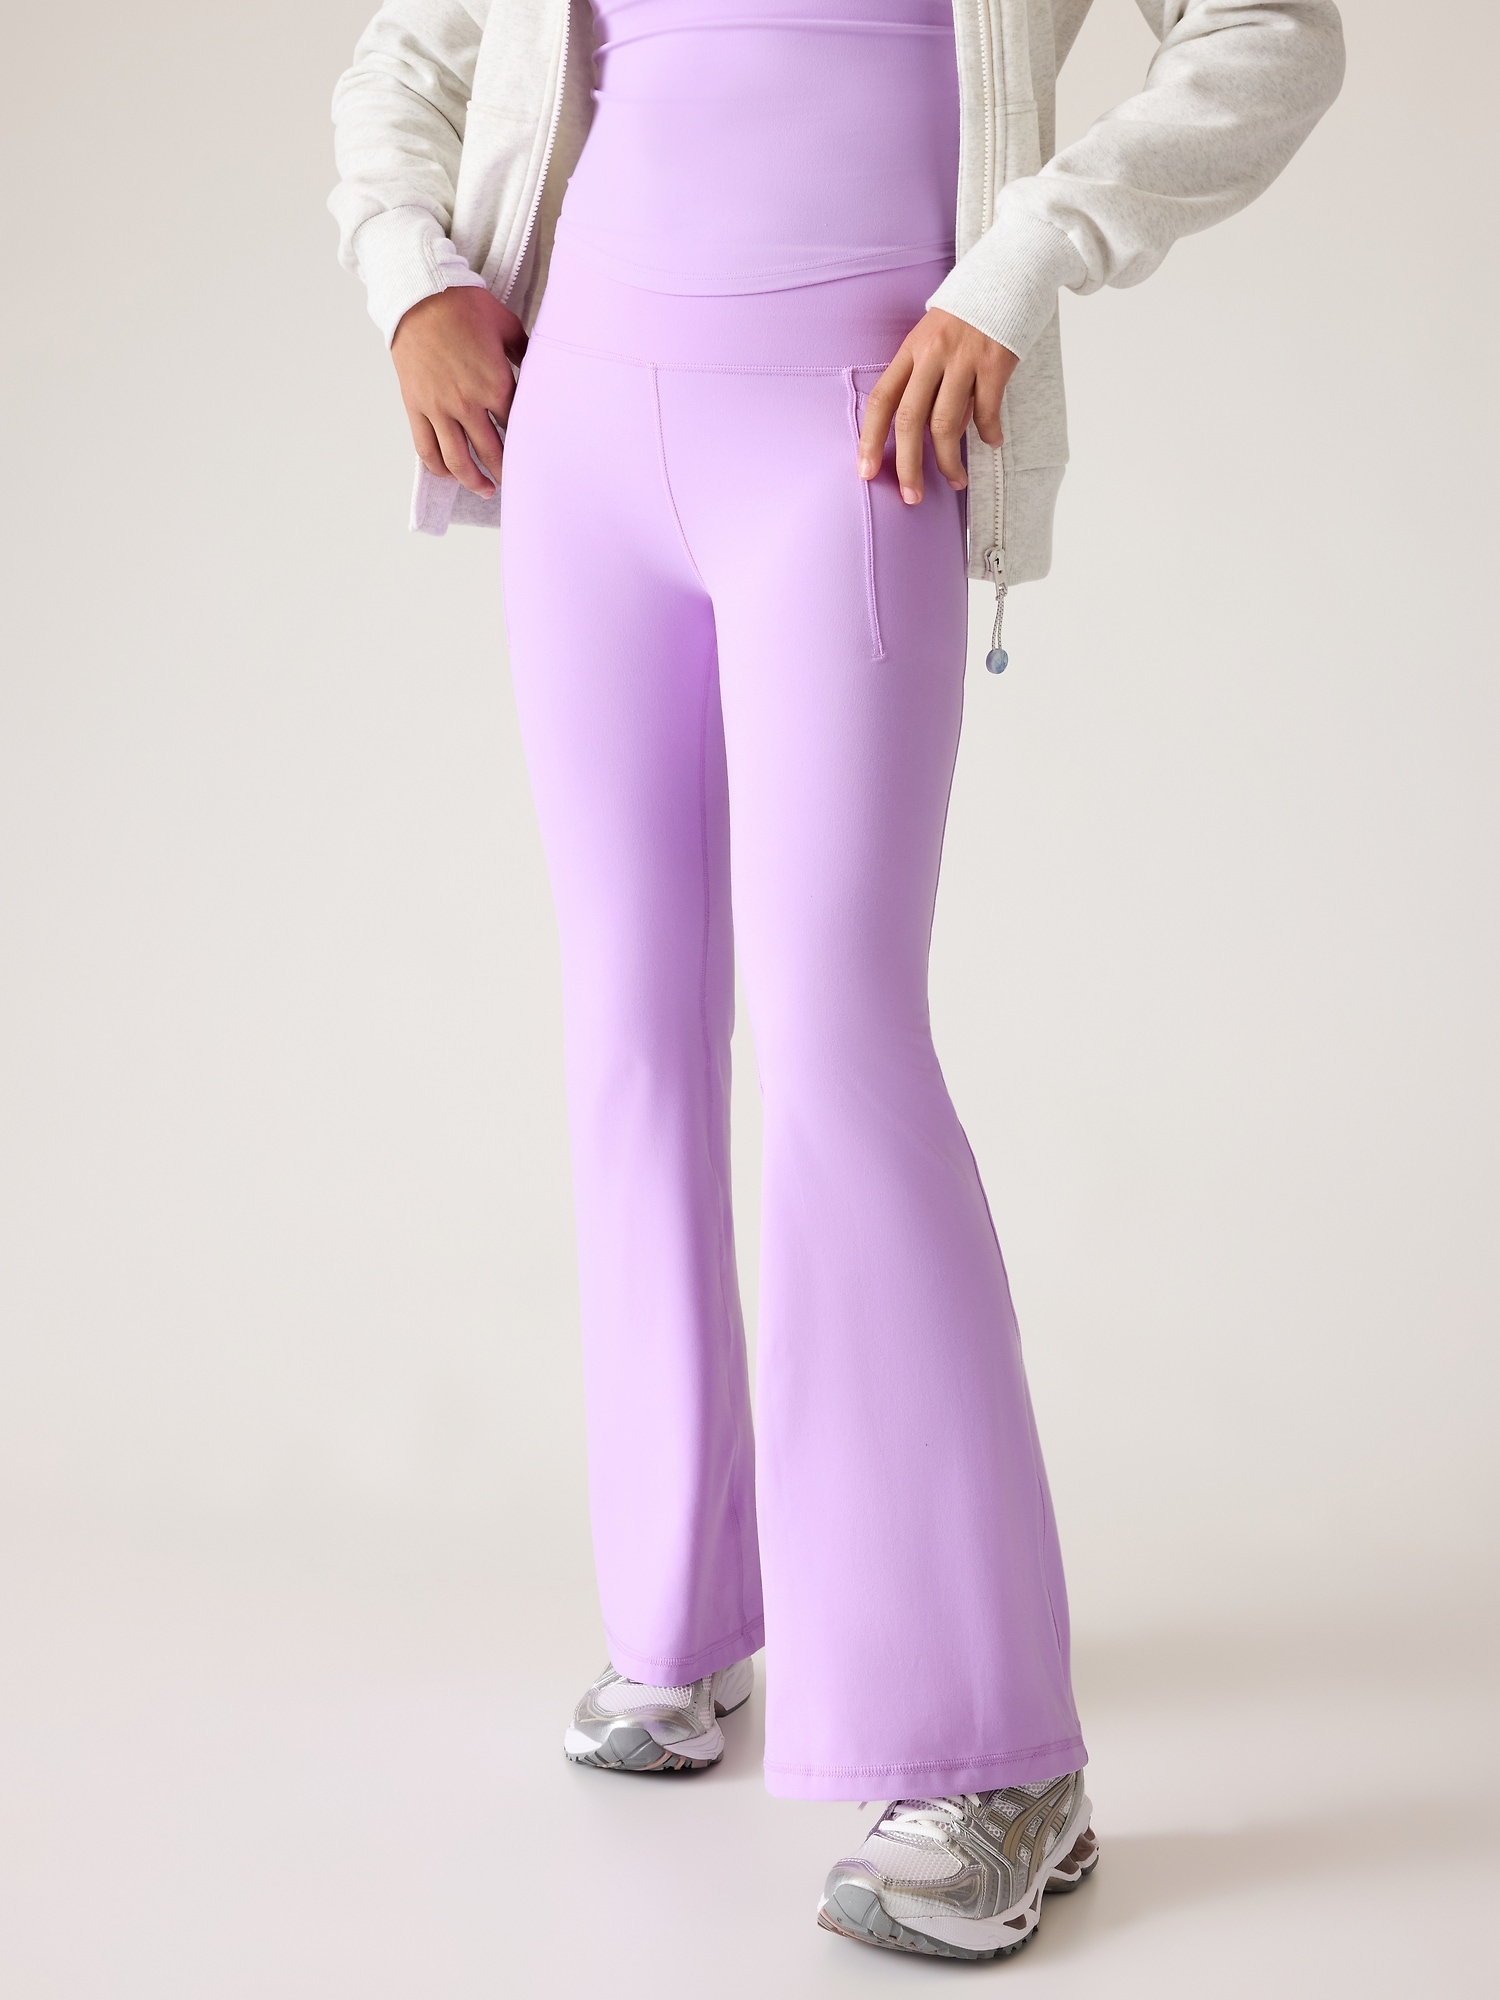 Athleta Elation Flare Pant NWT Size M - $67 New With Tags - From Stephanie